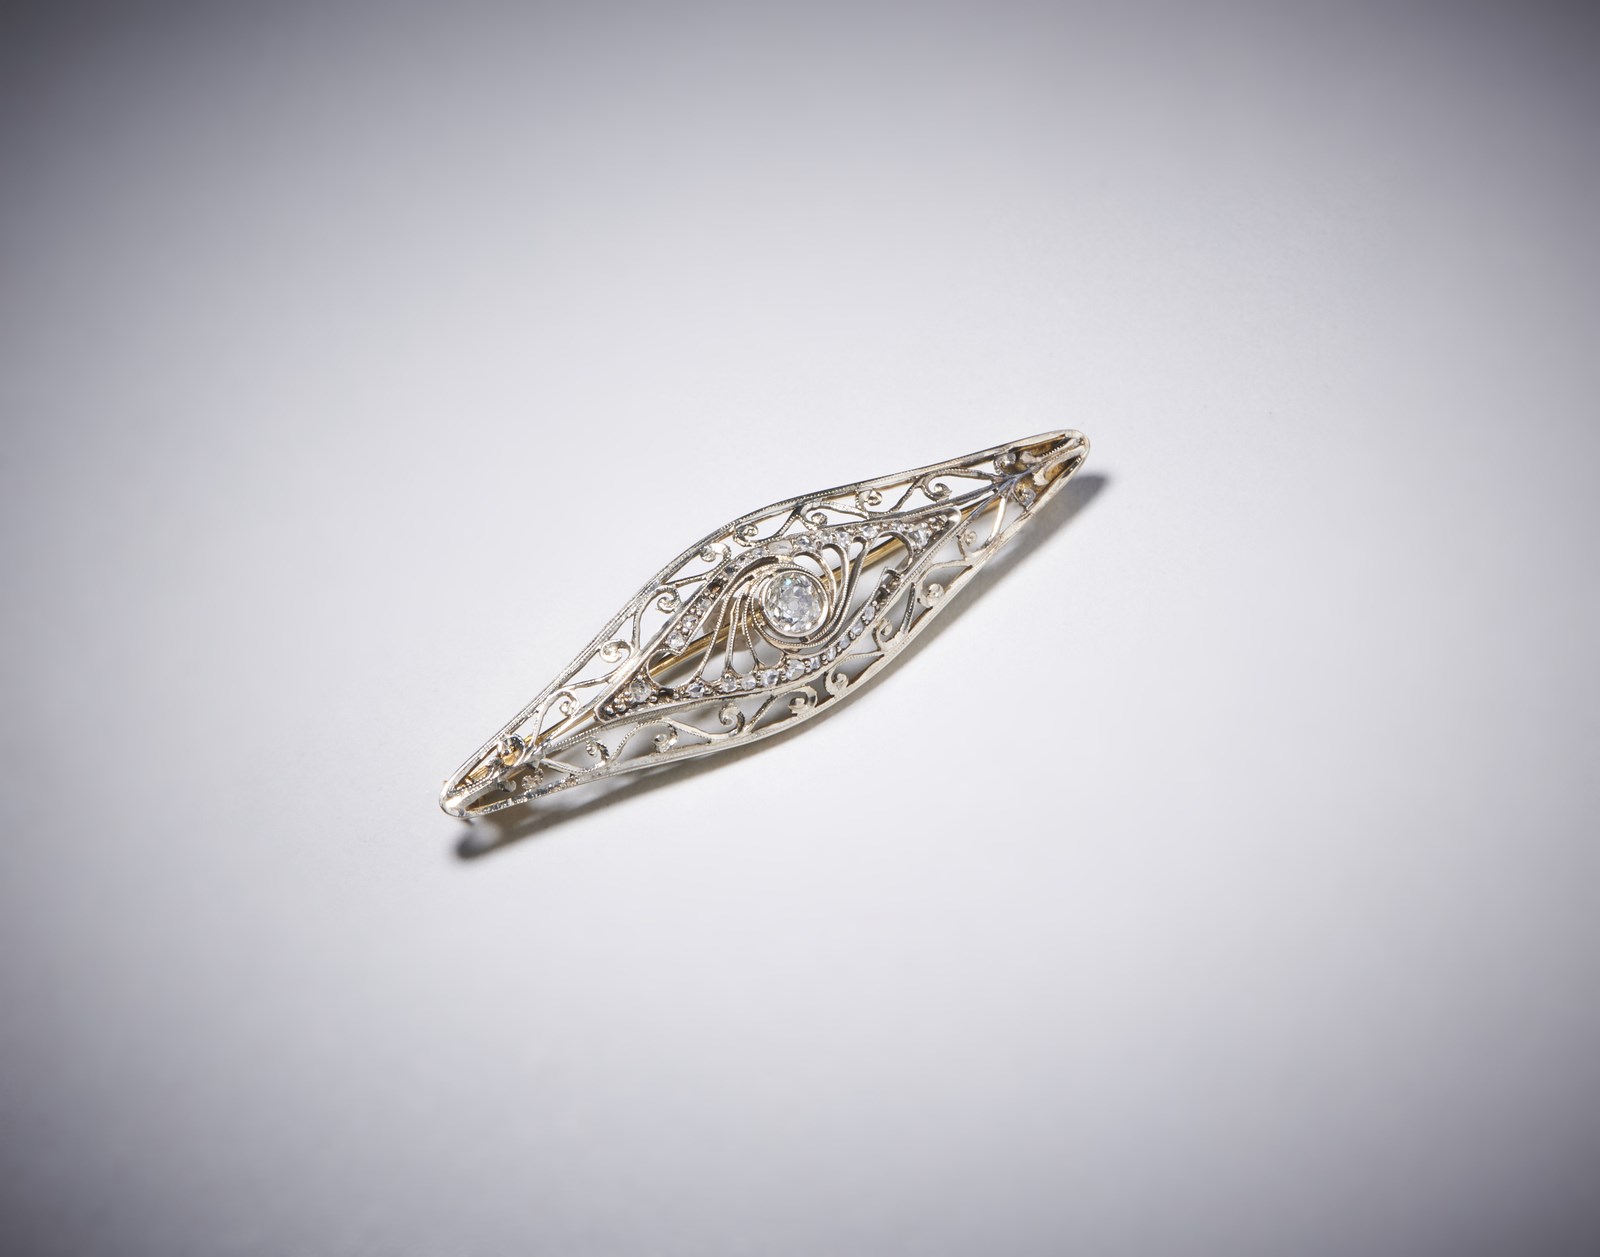 Diamond brooch in yellow gold 750/1000 and silver with diamond cut old central 0.40 cts. about and small diamonds rosette cut including 4 missing. (. )